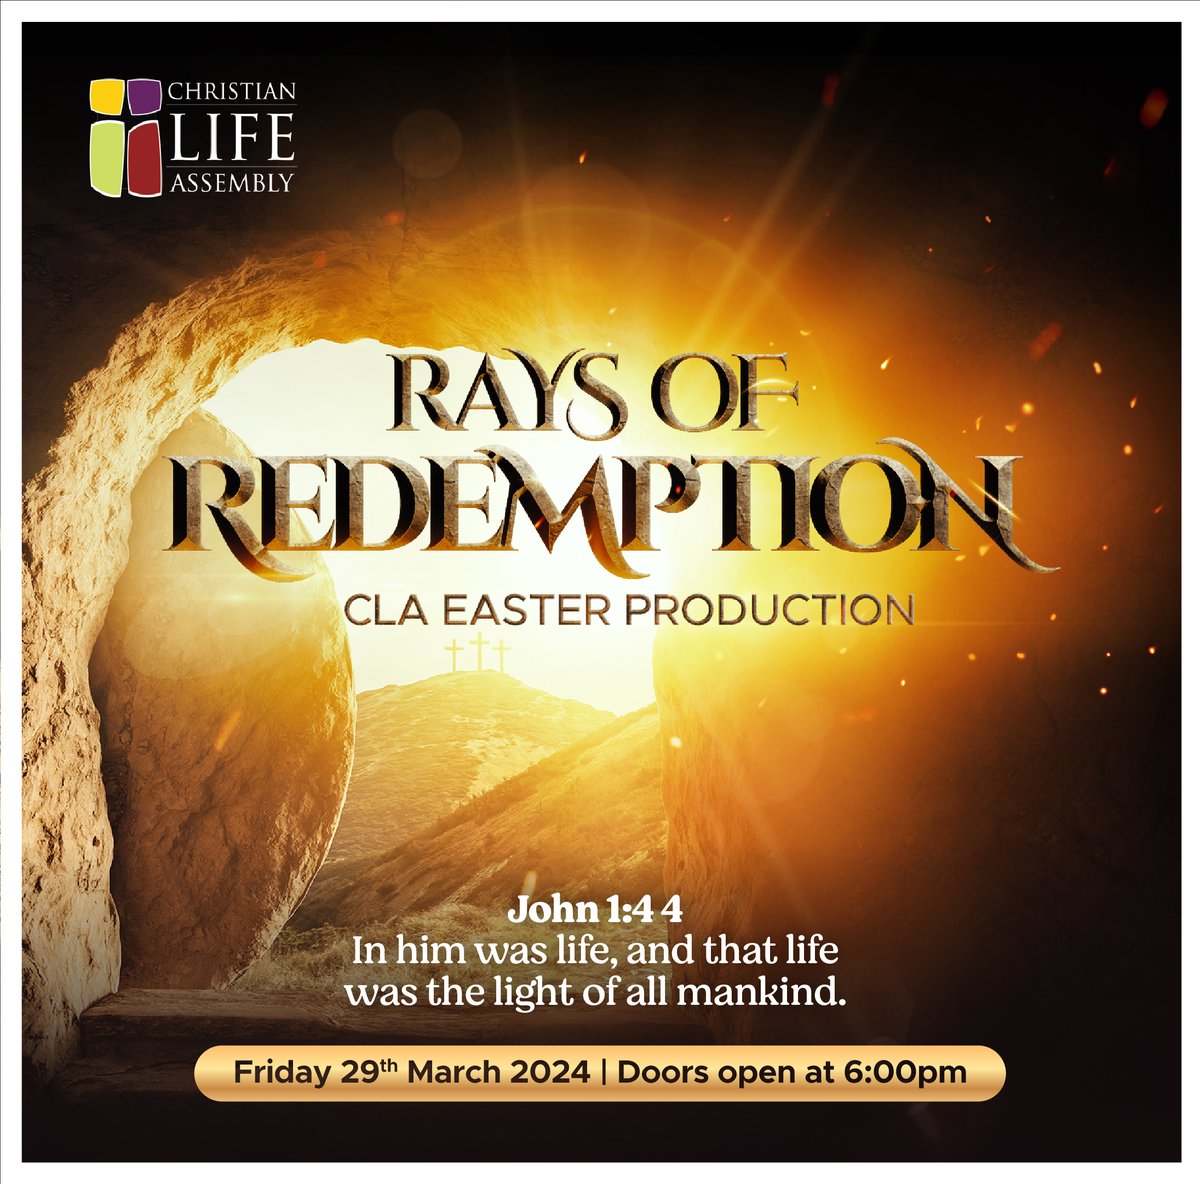 Remember, it's ONE SHOW only - don't miss out! #Easter2024 #raysofredemption #clarwanda #goodfriday🙏